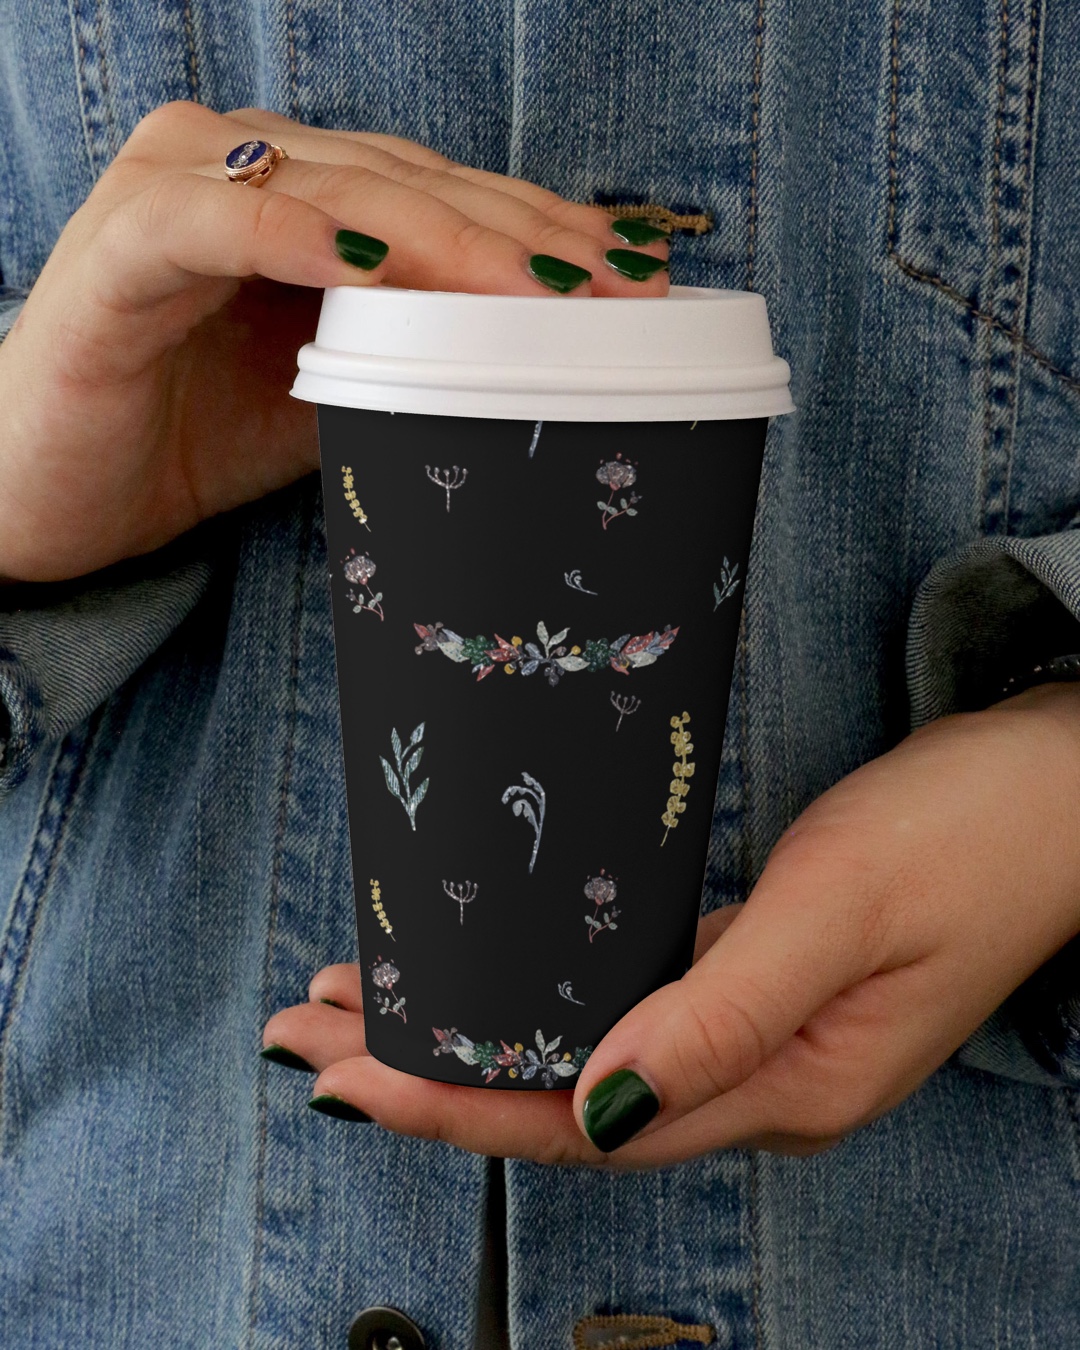 11 Seamless Flying Flowers Patterns cup mockup.